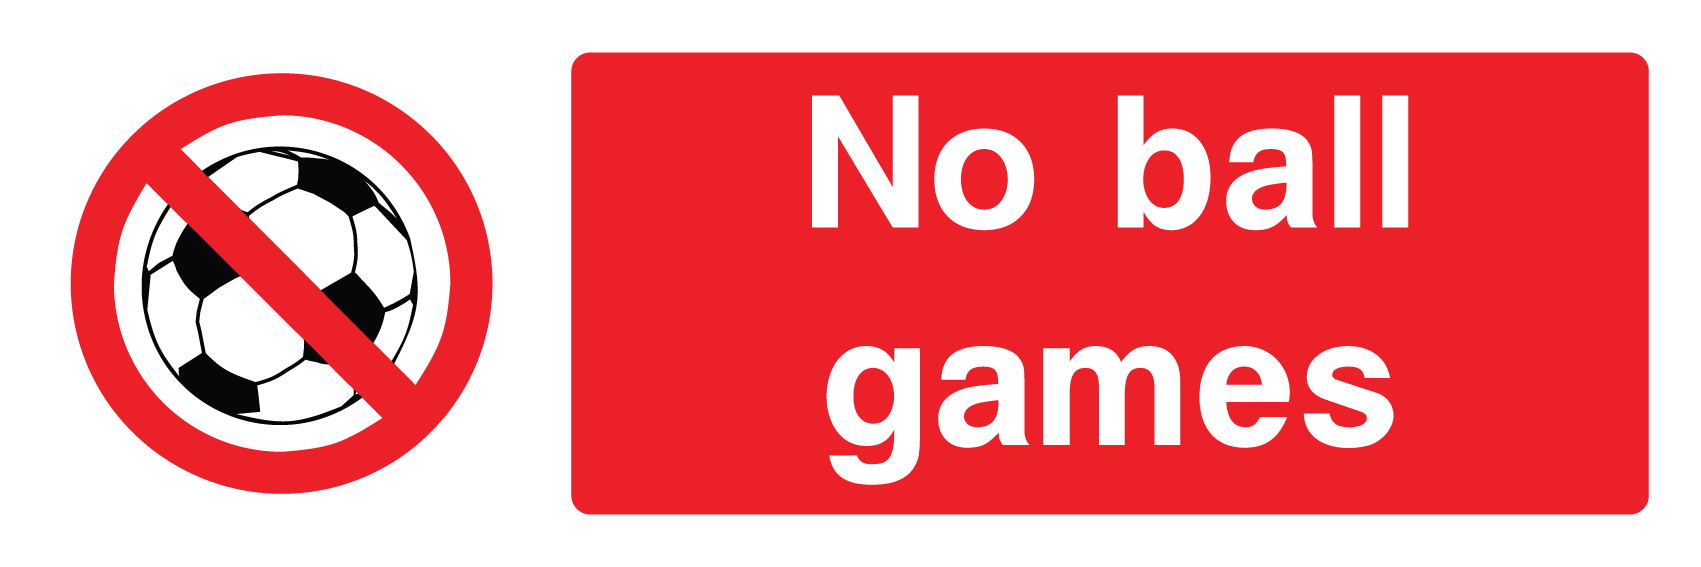 NO BALL GAMES   A5/A4/A3 STICKER OR FOAMEX SIGN FULLY WEATHERPROOF 